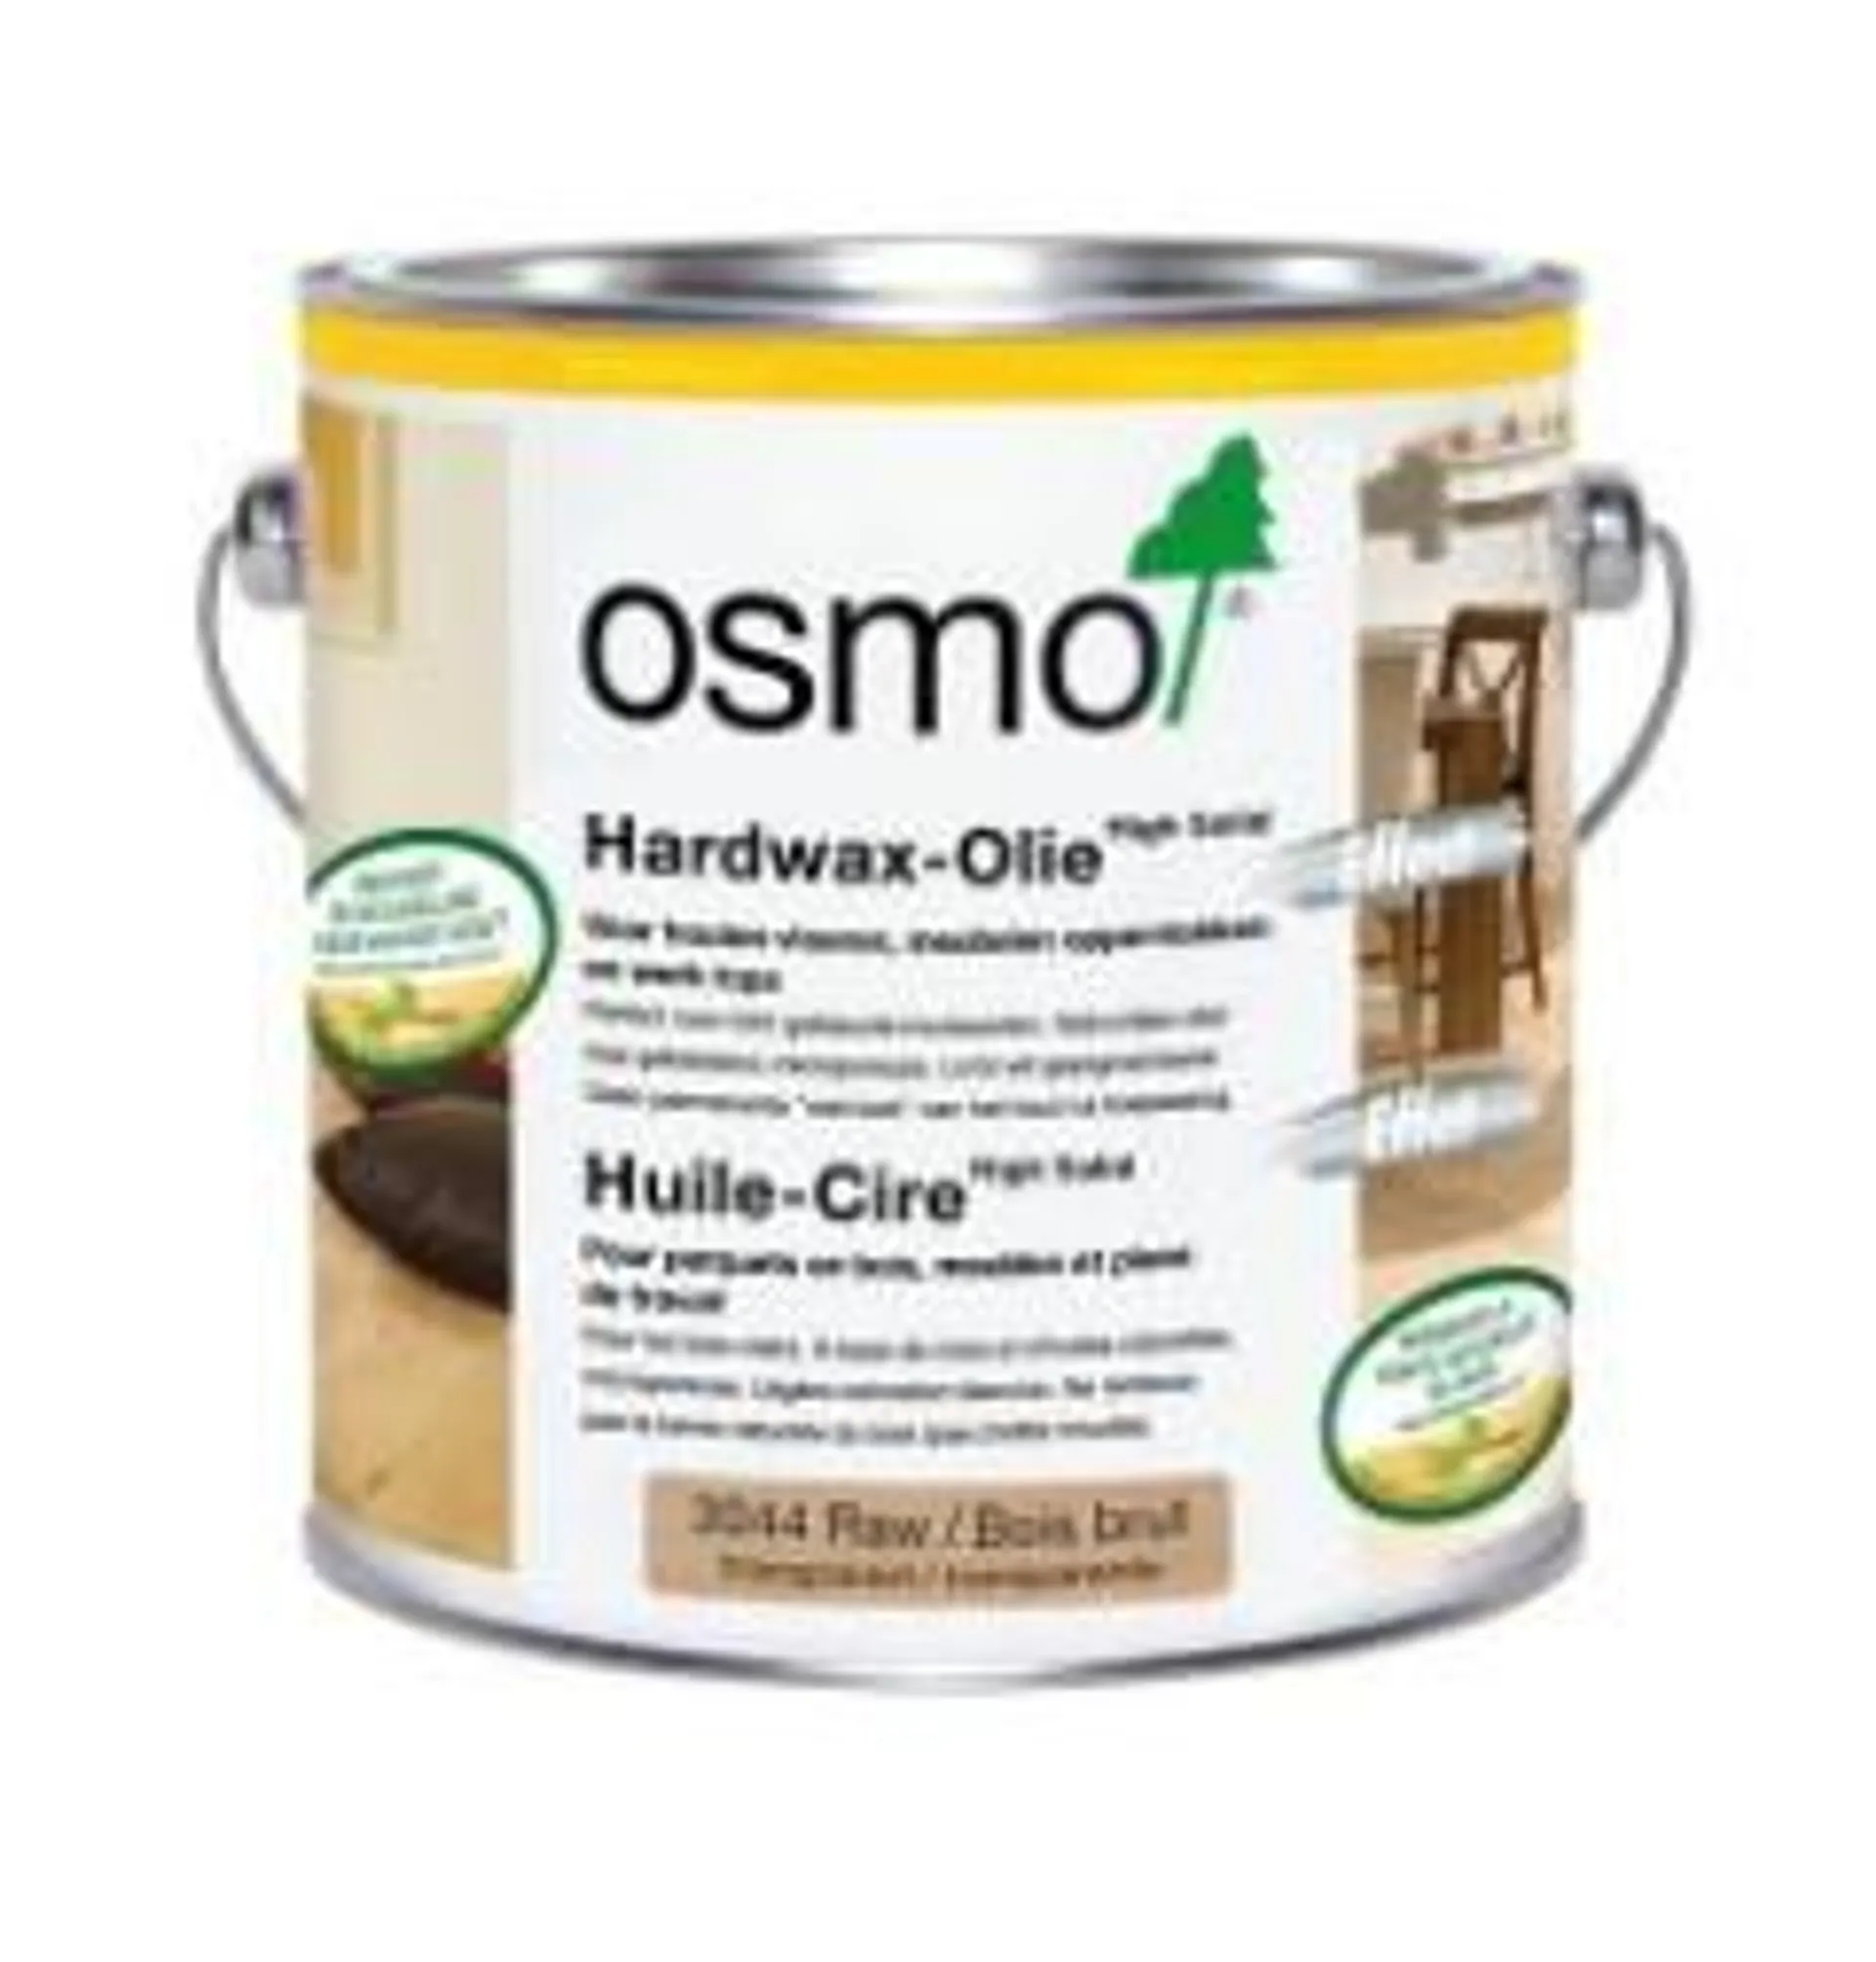 OSMO HARDE WAS OLIE EFFECT RAW LOOK 3044 0.75L